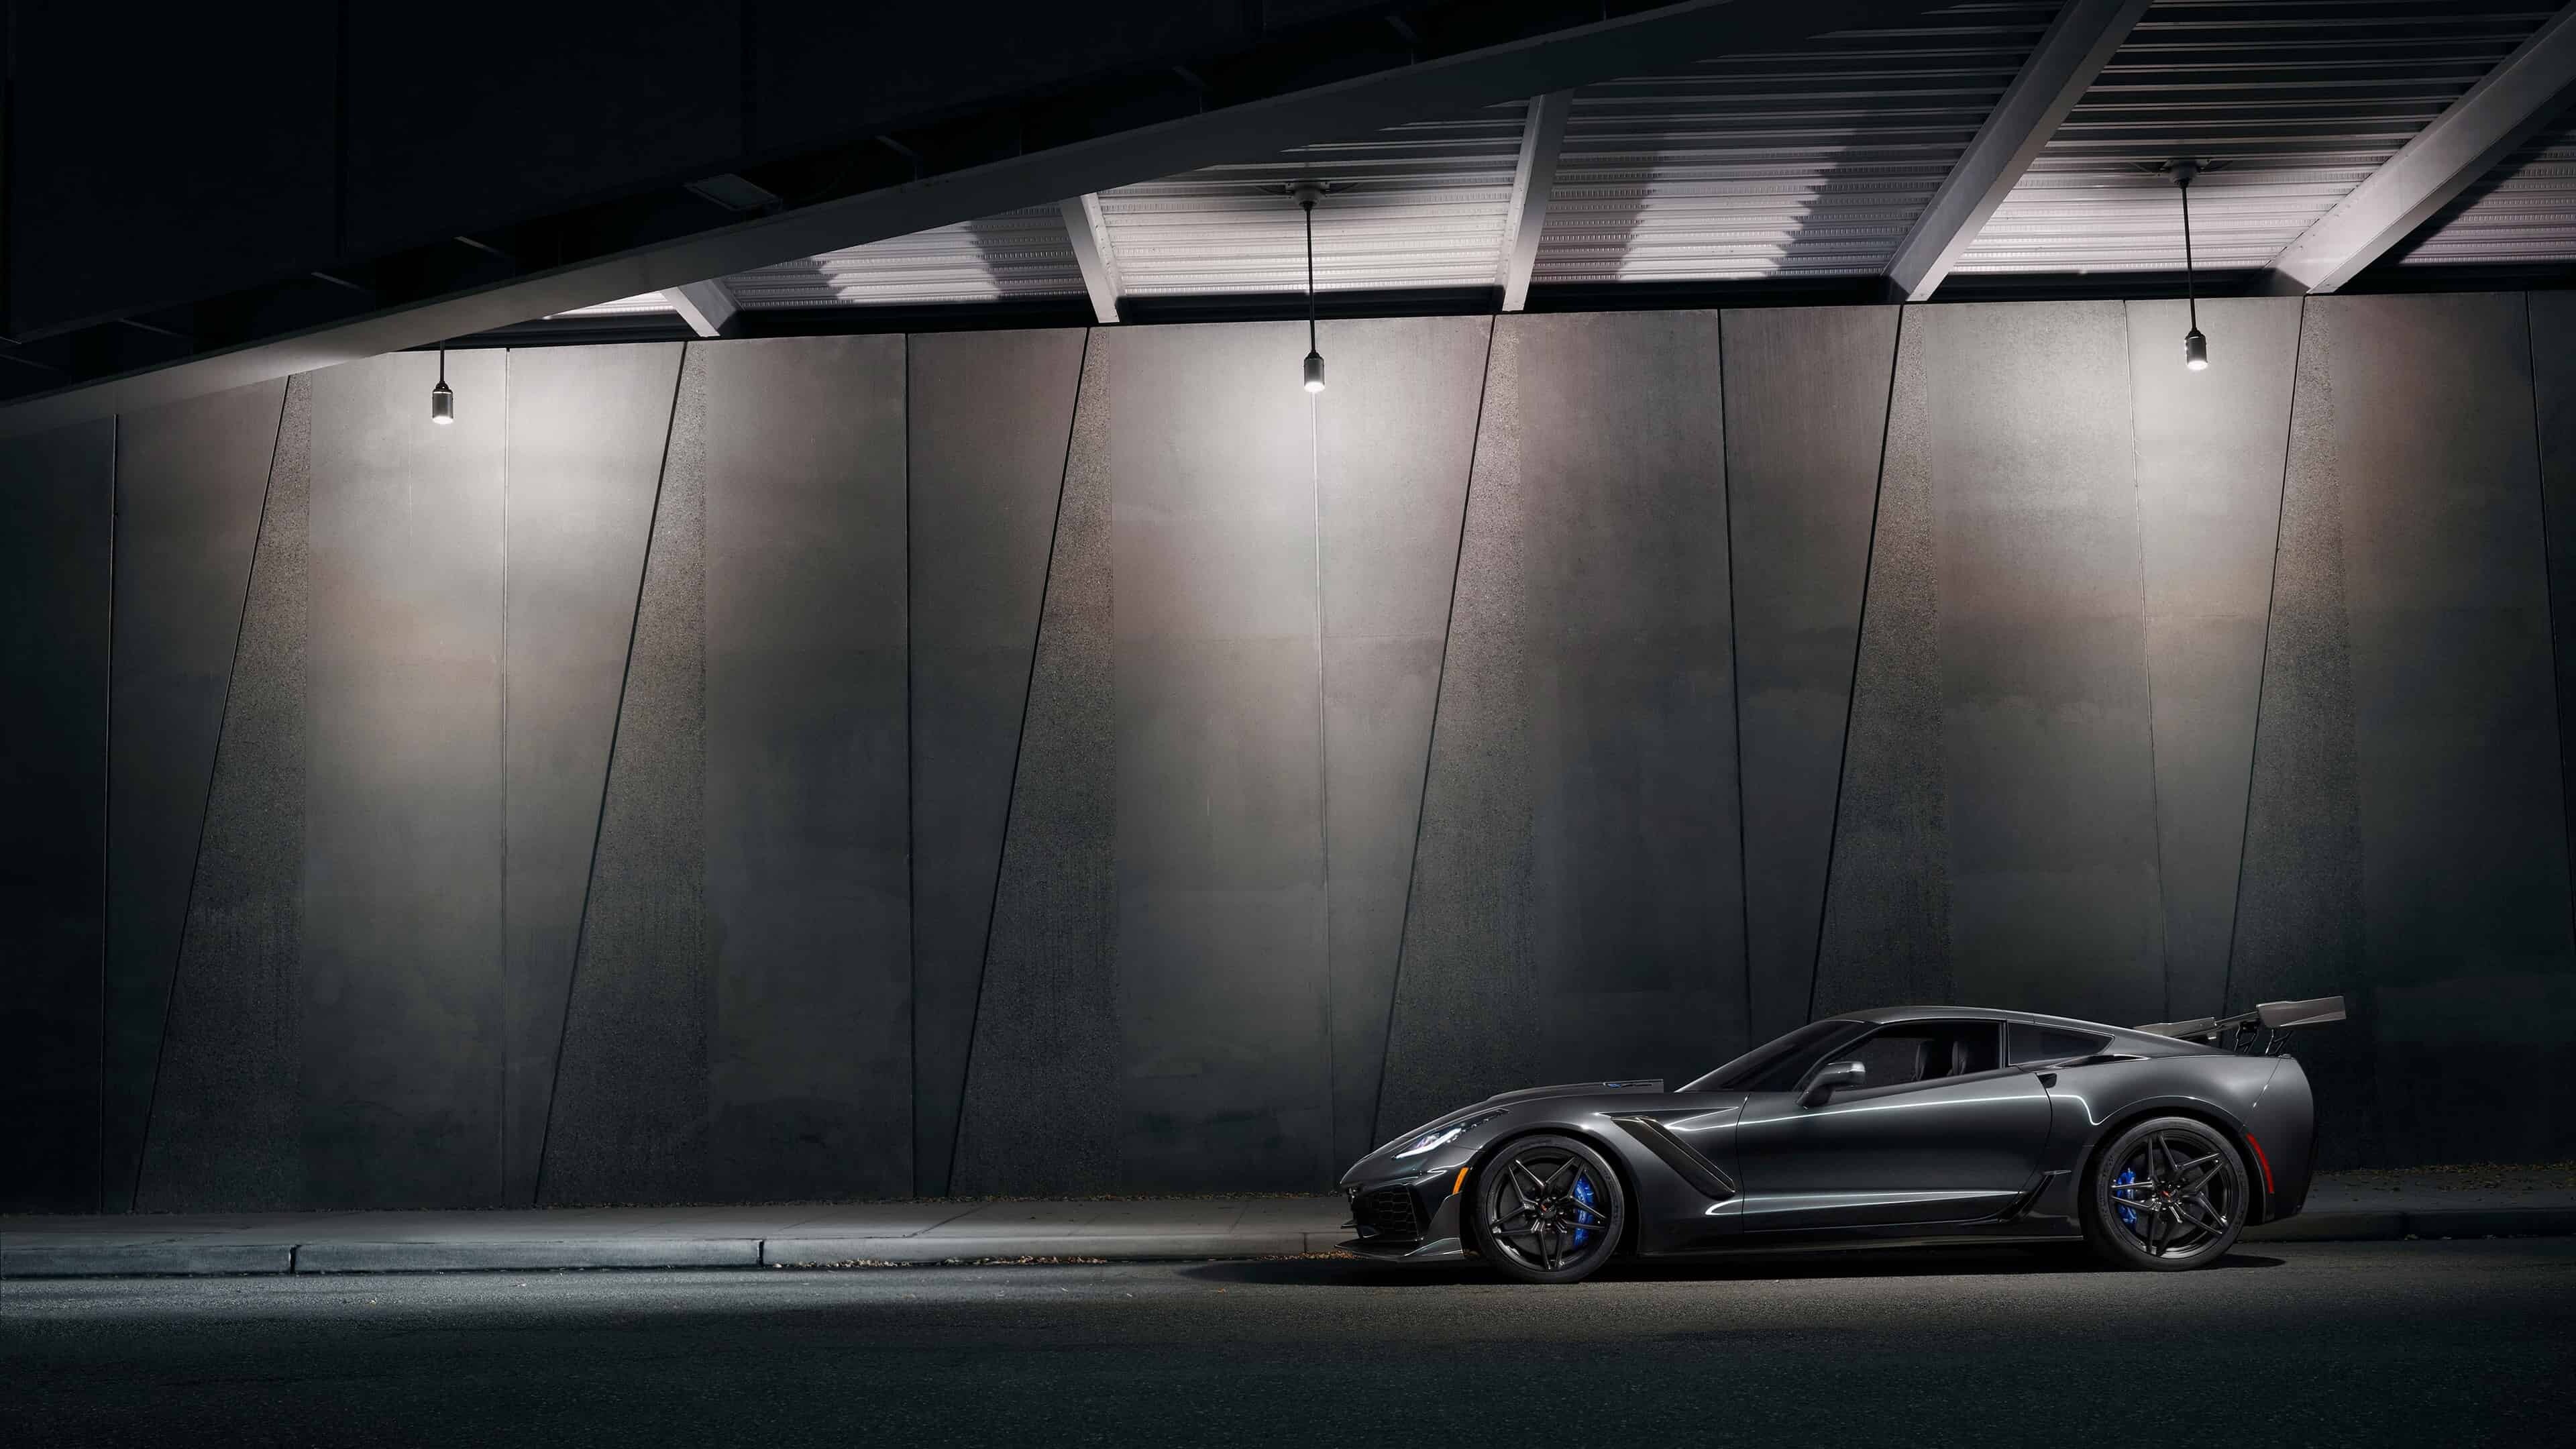 Chevrolet: The 2019 ZR1 is a supercar that advances Corvette’s performance legacy with the highest power, greatest track performance, and most advanced technology in its production history. 3840x2160 4K Wallpaper.